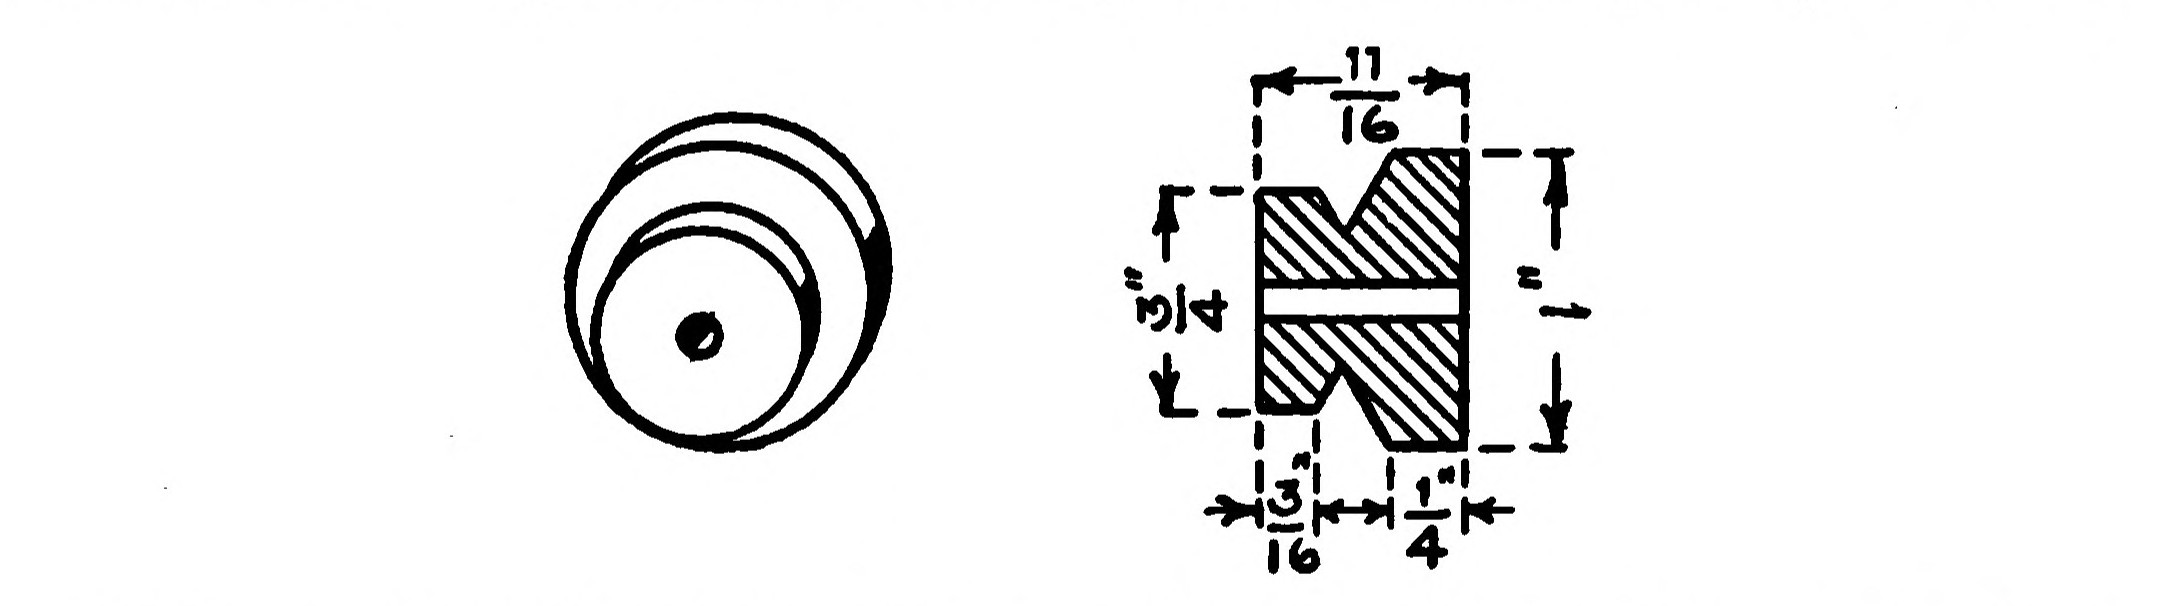 FIG. 4.—Details of the Grooved Pulley, attached to each plate. The Pulleys are turned out of wood.